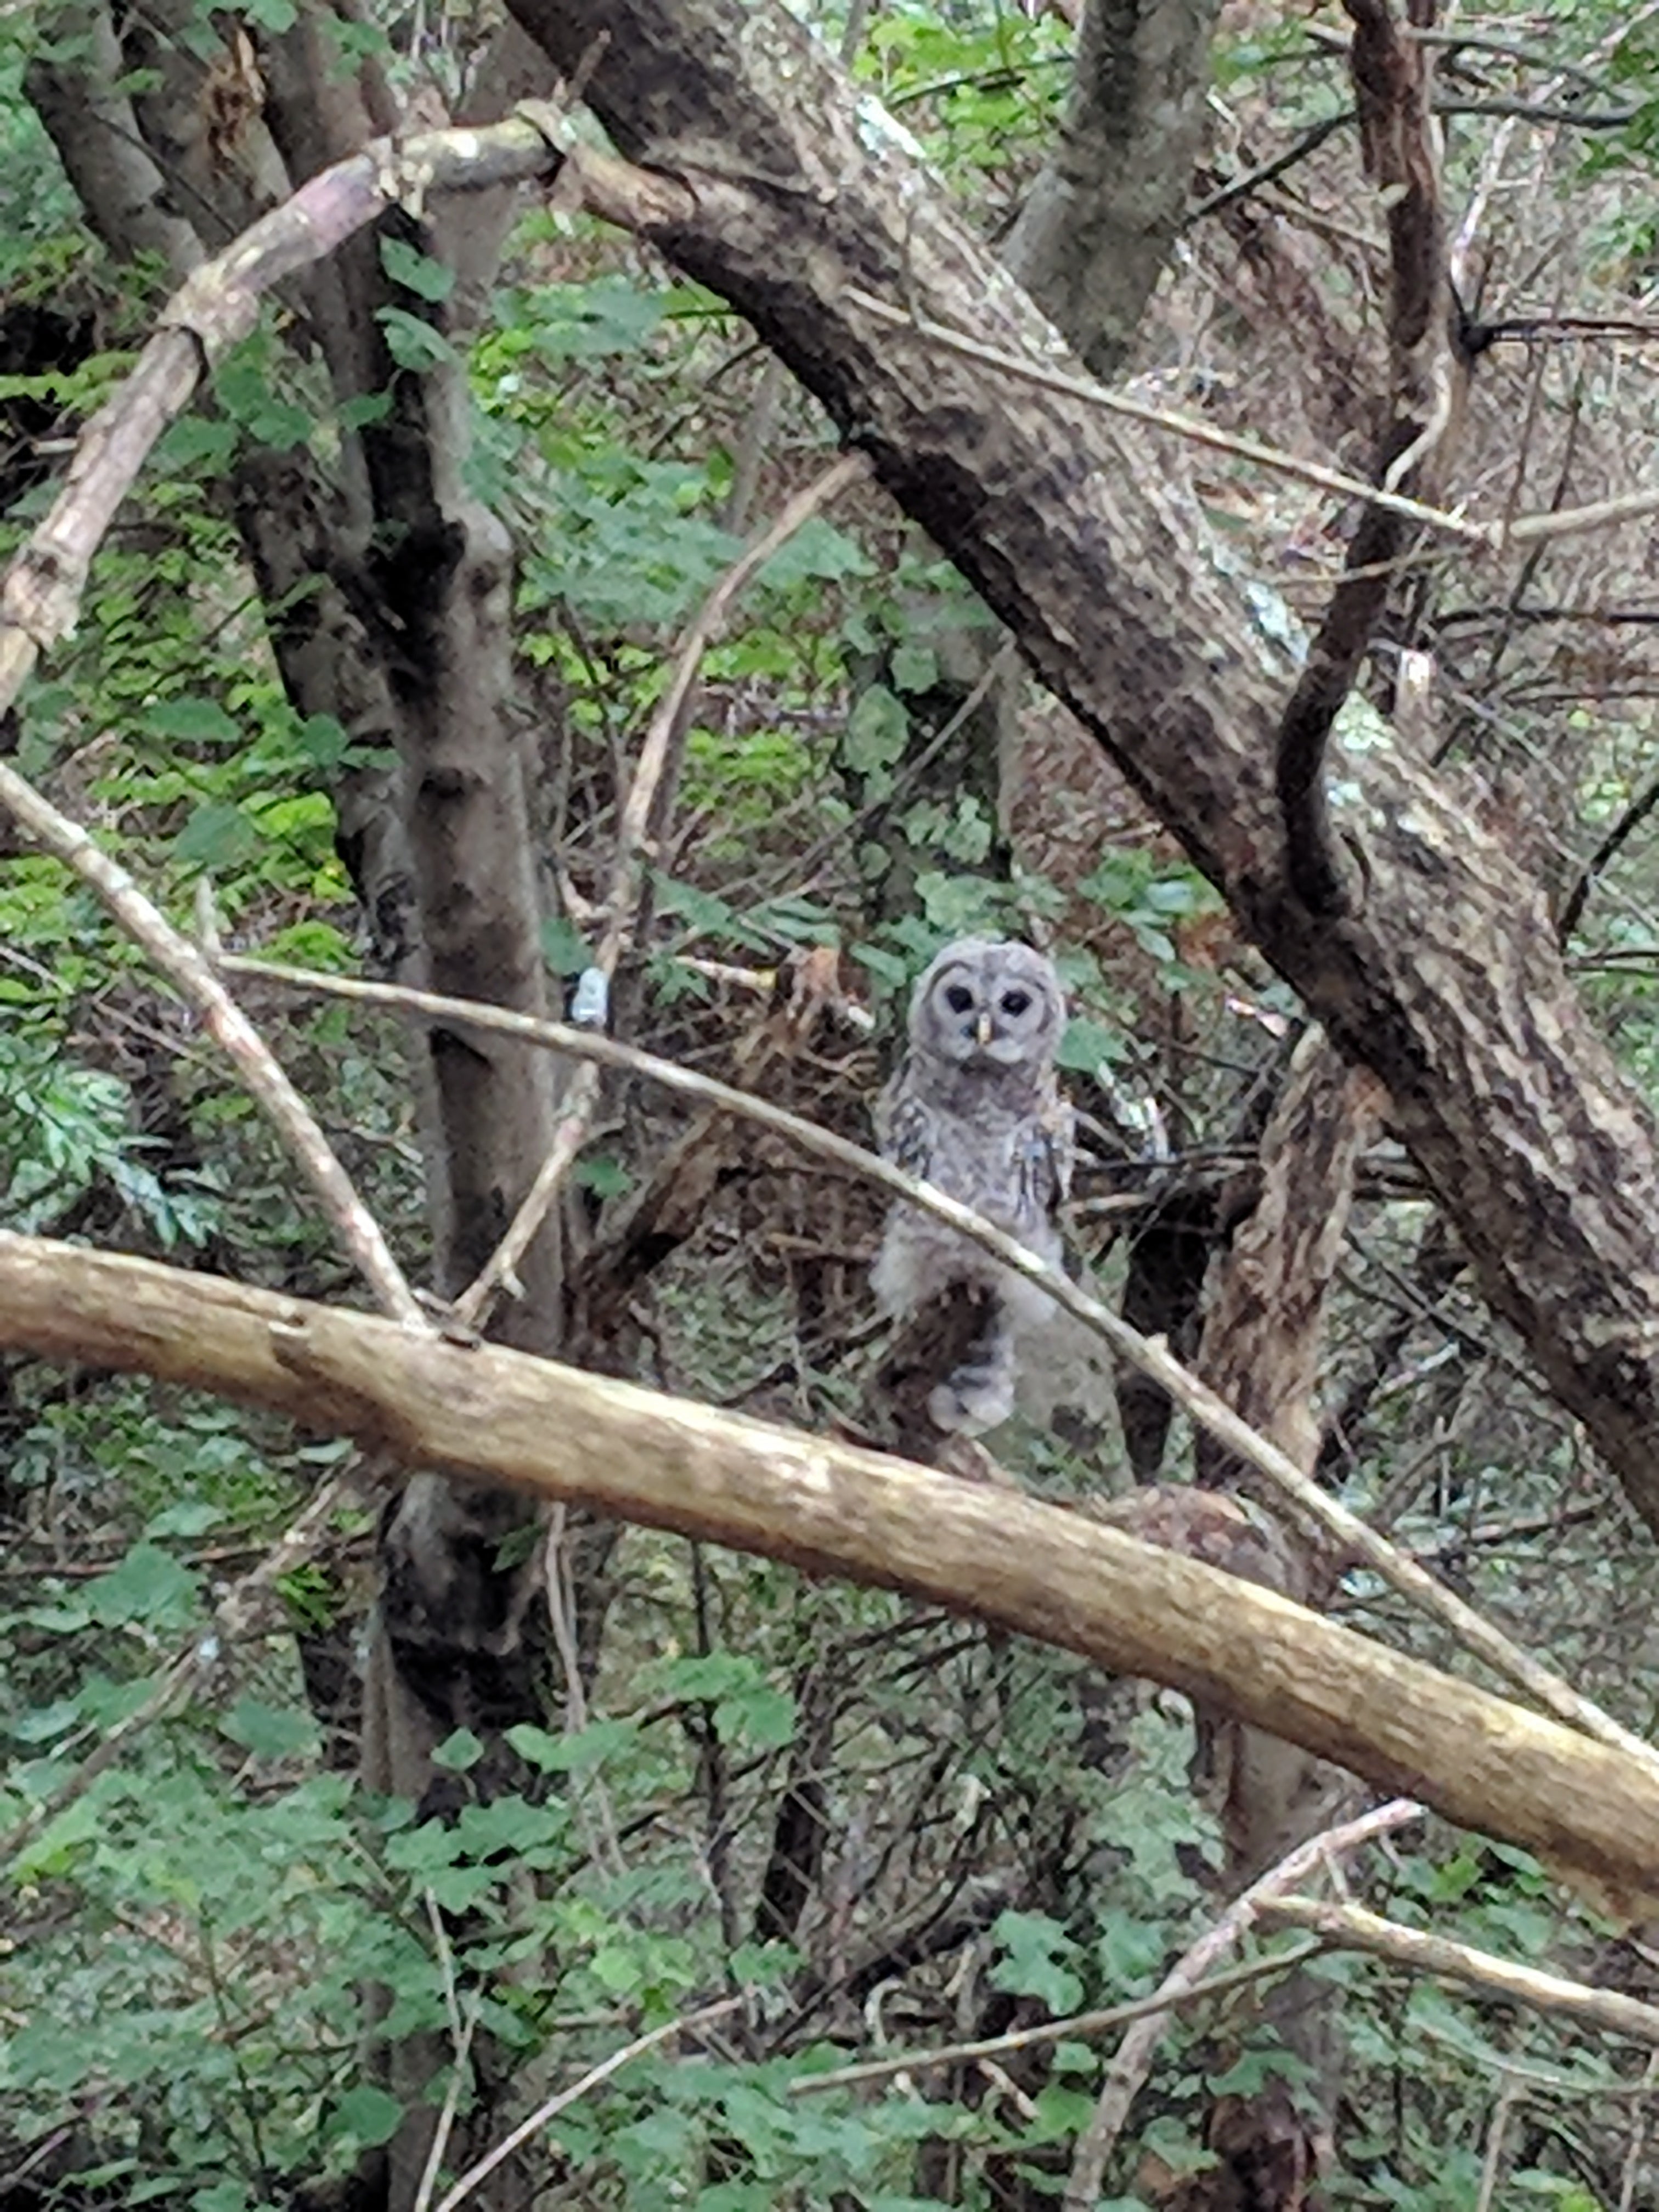 Saw this guy watching me on my late afternoon jog. it was amazing.